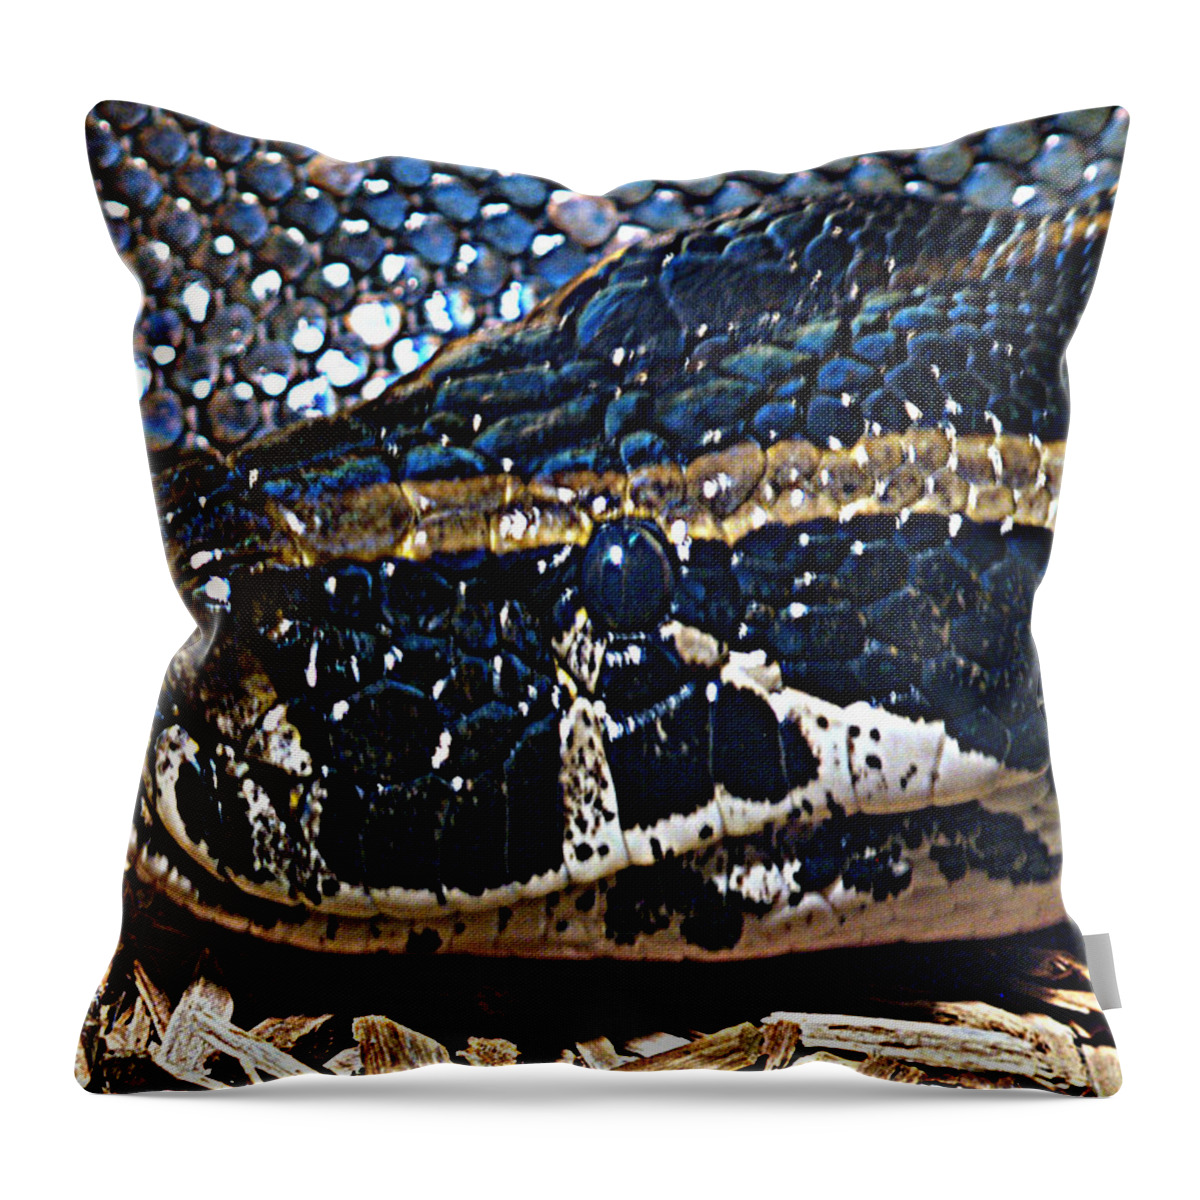 Snake Throw Pillow featuring the photograph On The Hunt by Bob Johnson